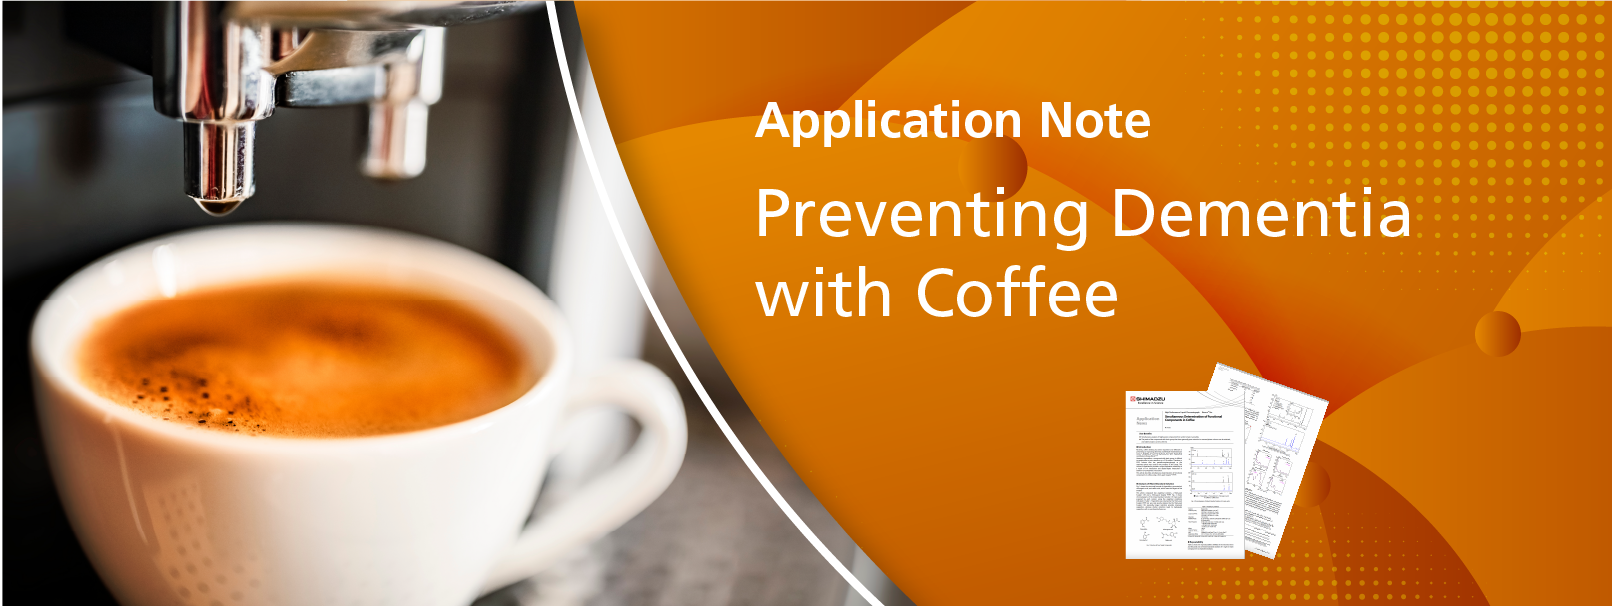 Preventing Dementia with Coffee